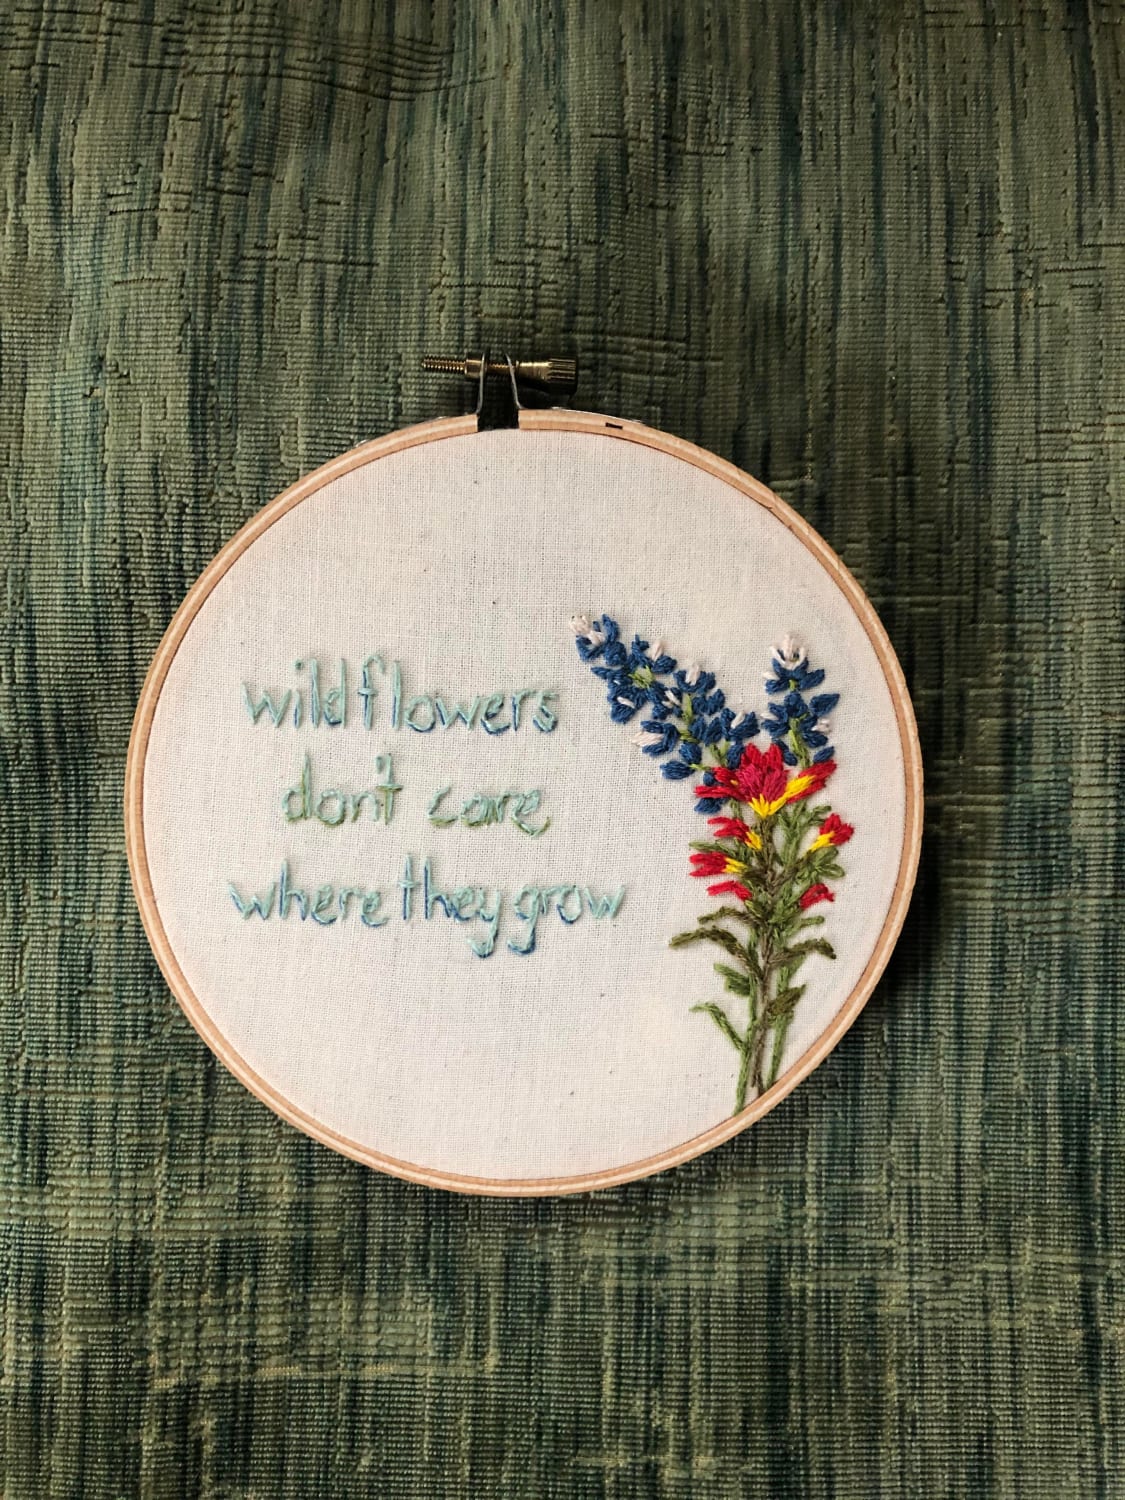 Wildflowers & print letters for my Texan friend